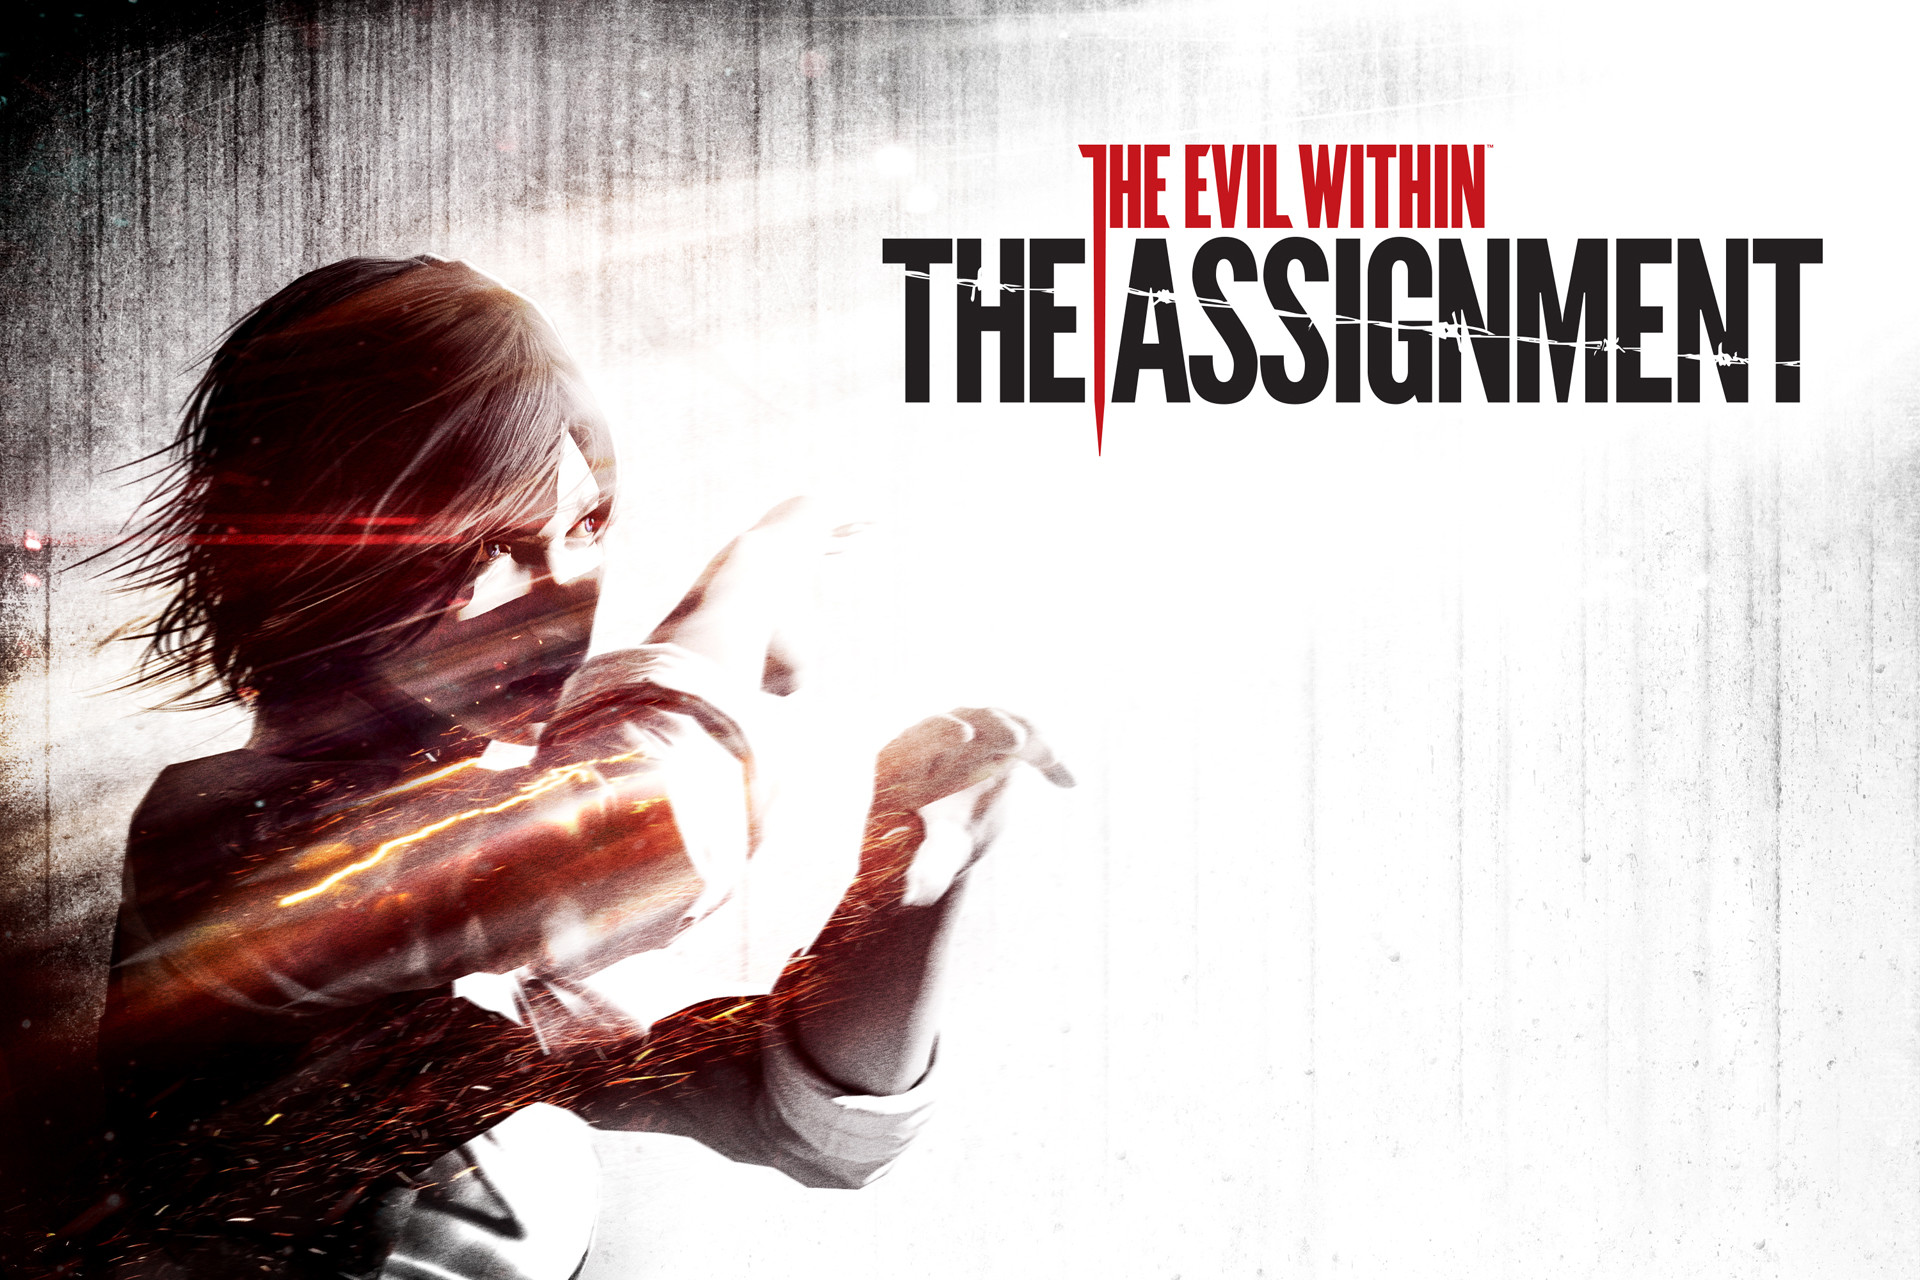 evil within assignment snail